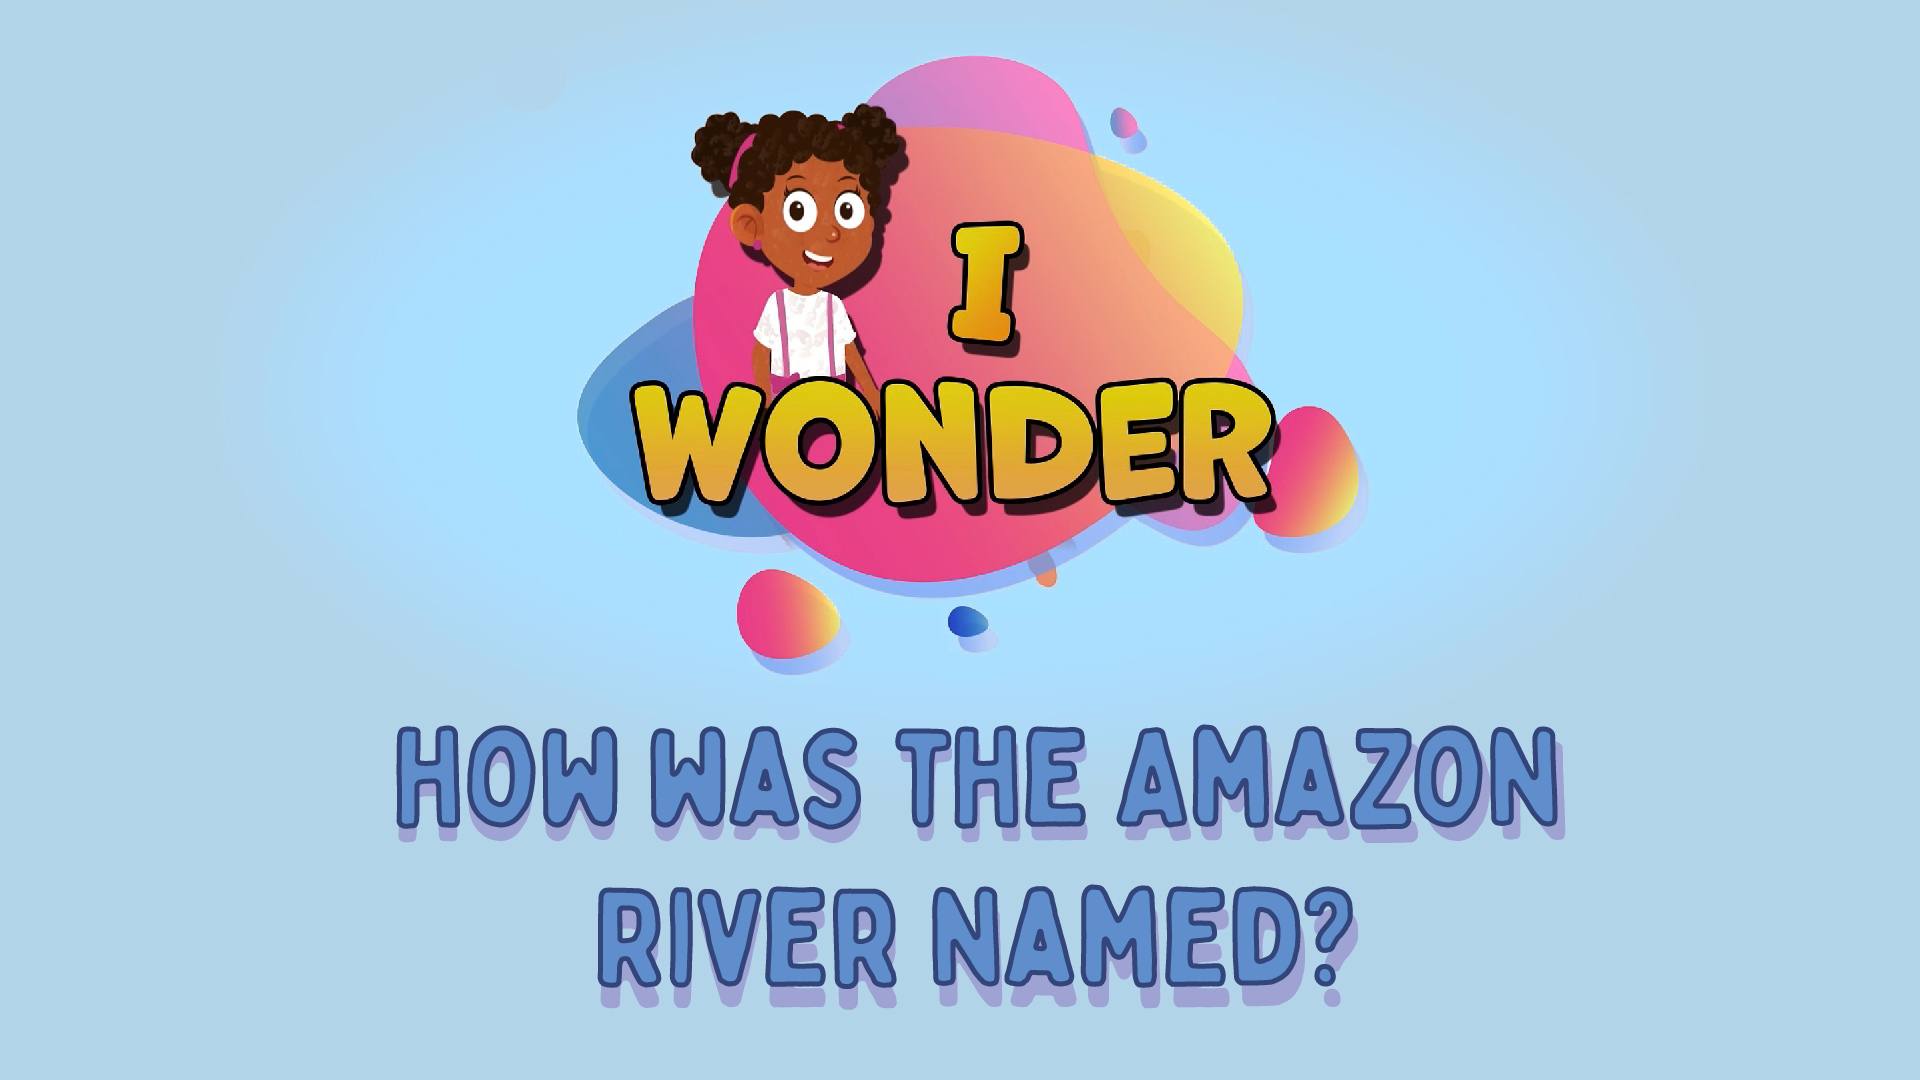 How Was The Amazon River Named?